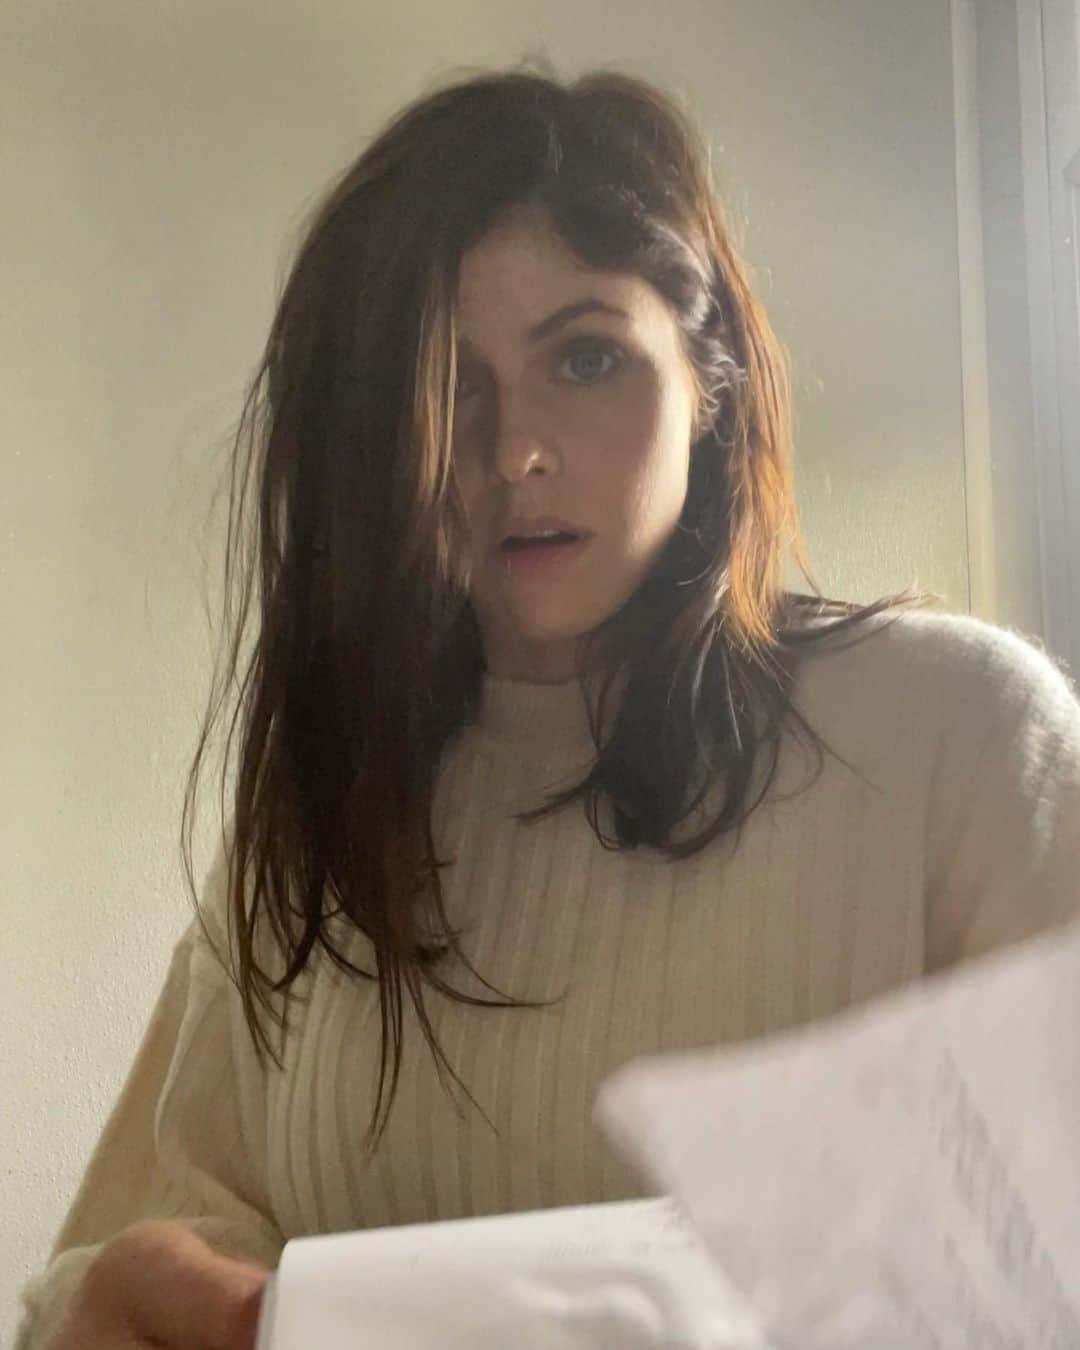 Alexandra Daddario Cutely Rehearsing her Lines for the Movie “Wildflower”